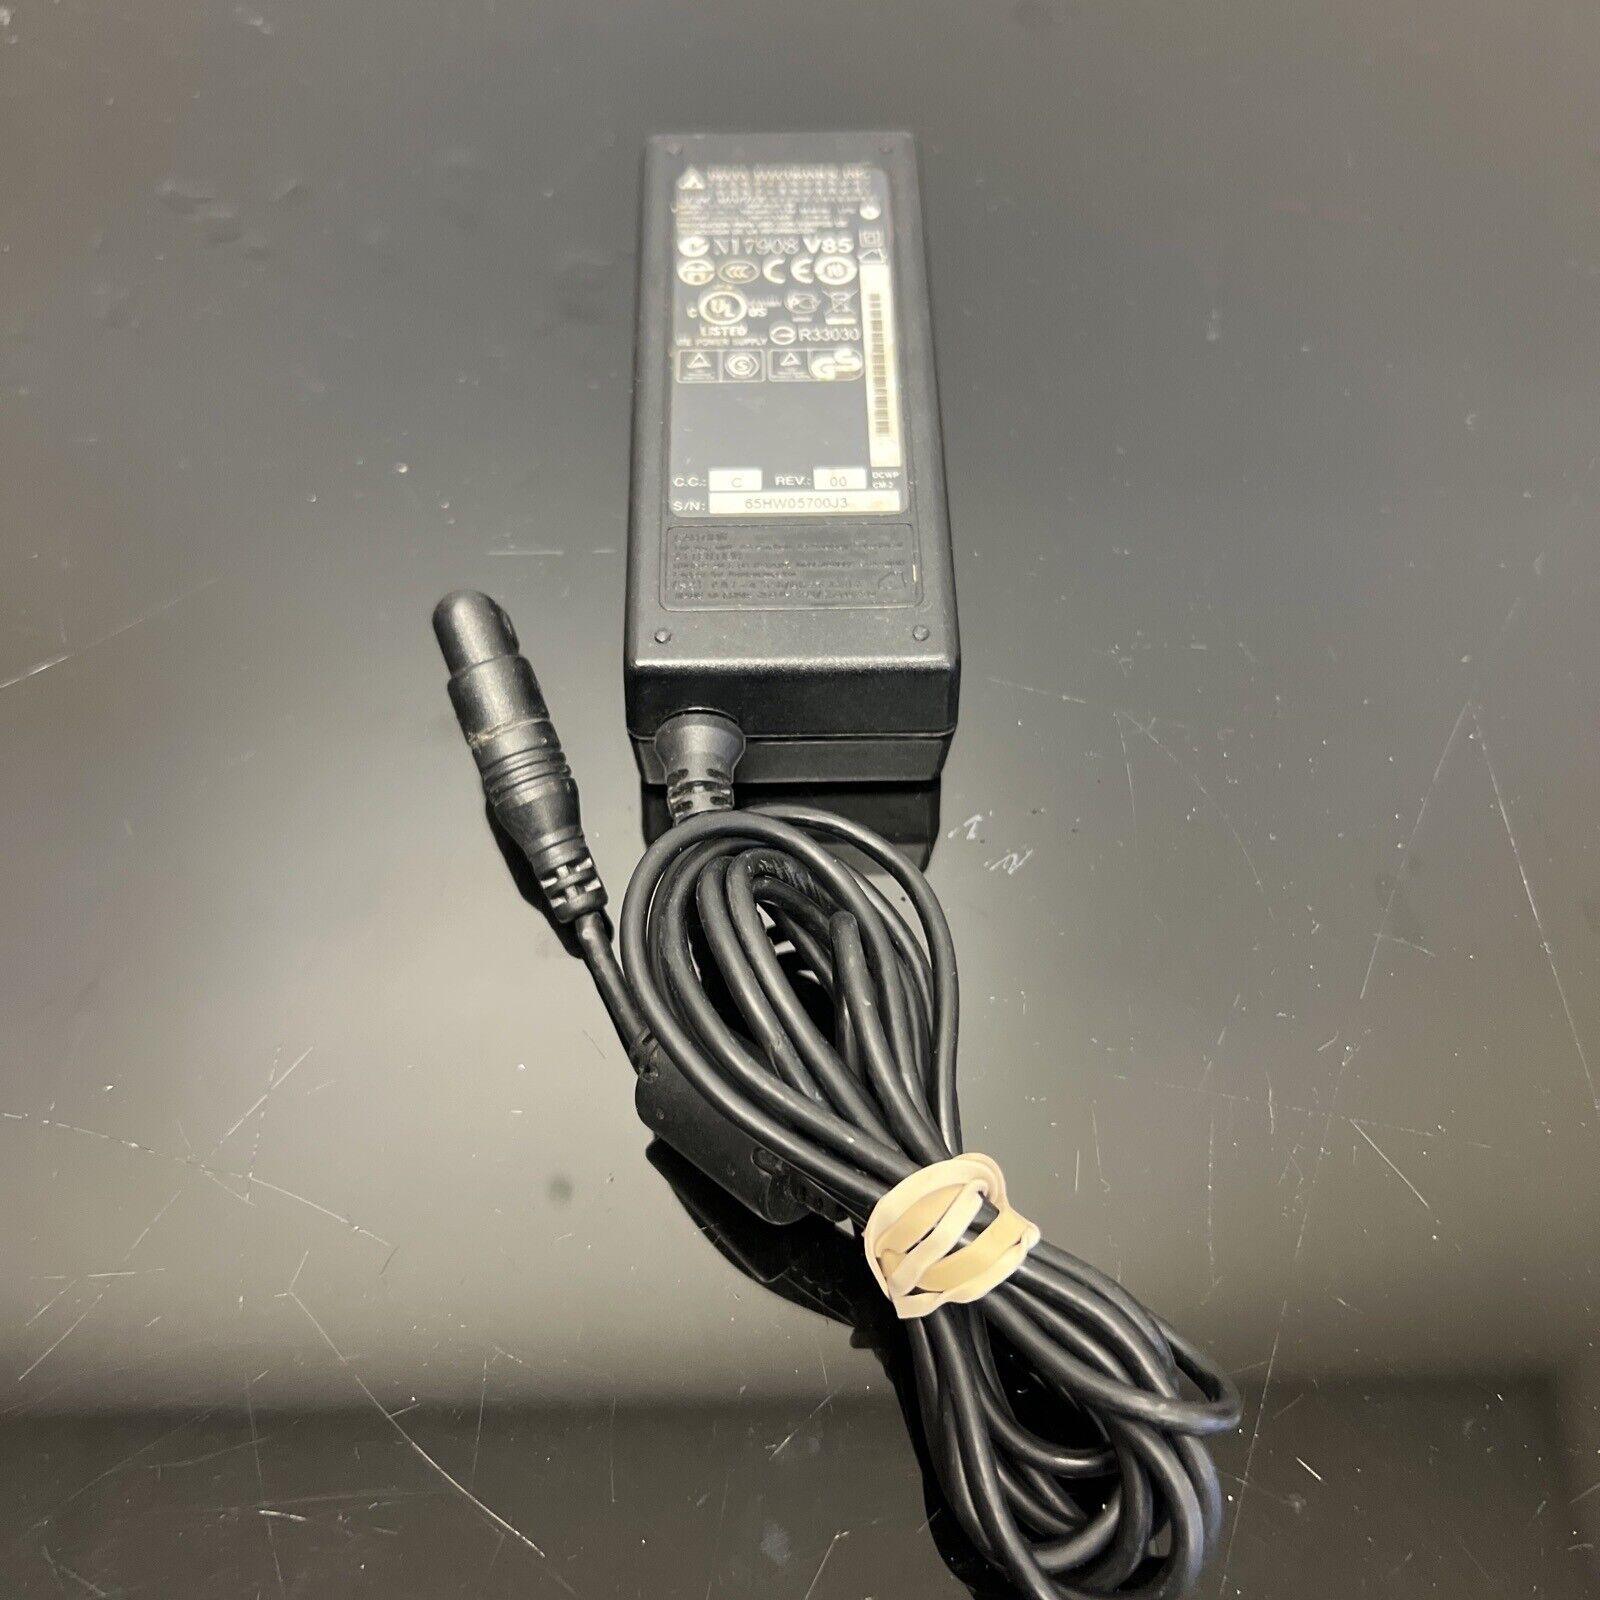 *Brand NEW*Delta Electronics ADP-65JH BB 19V 3.42A AC/DC Adapter Power Supply